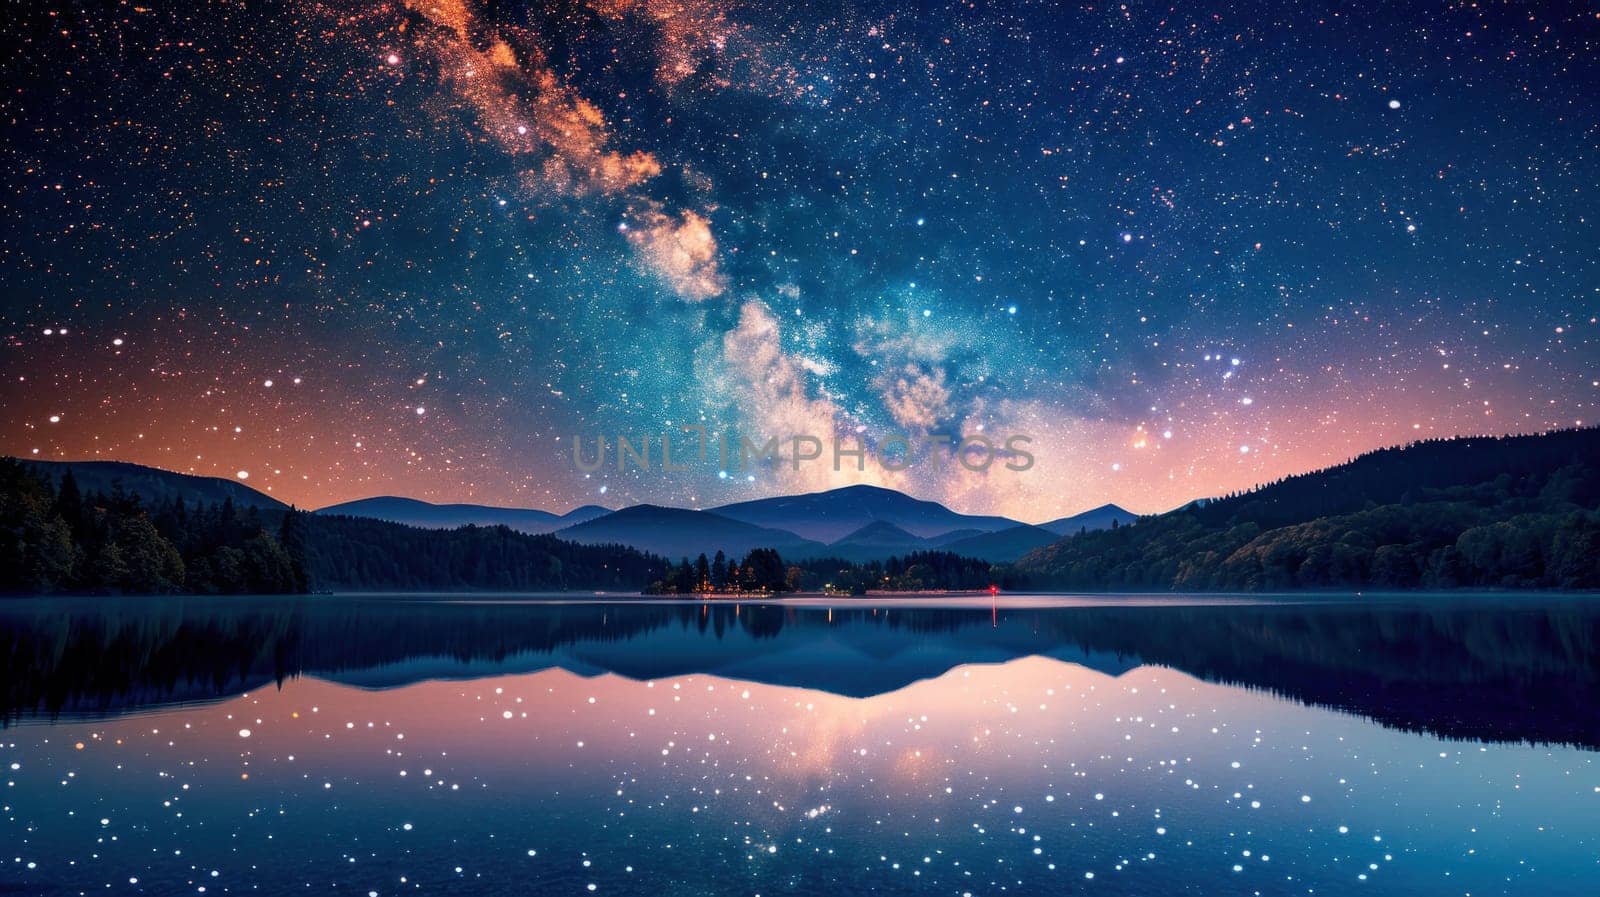 A beautiful night sky with a lake and mountains in the background by golfmerrymaker